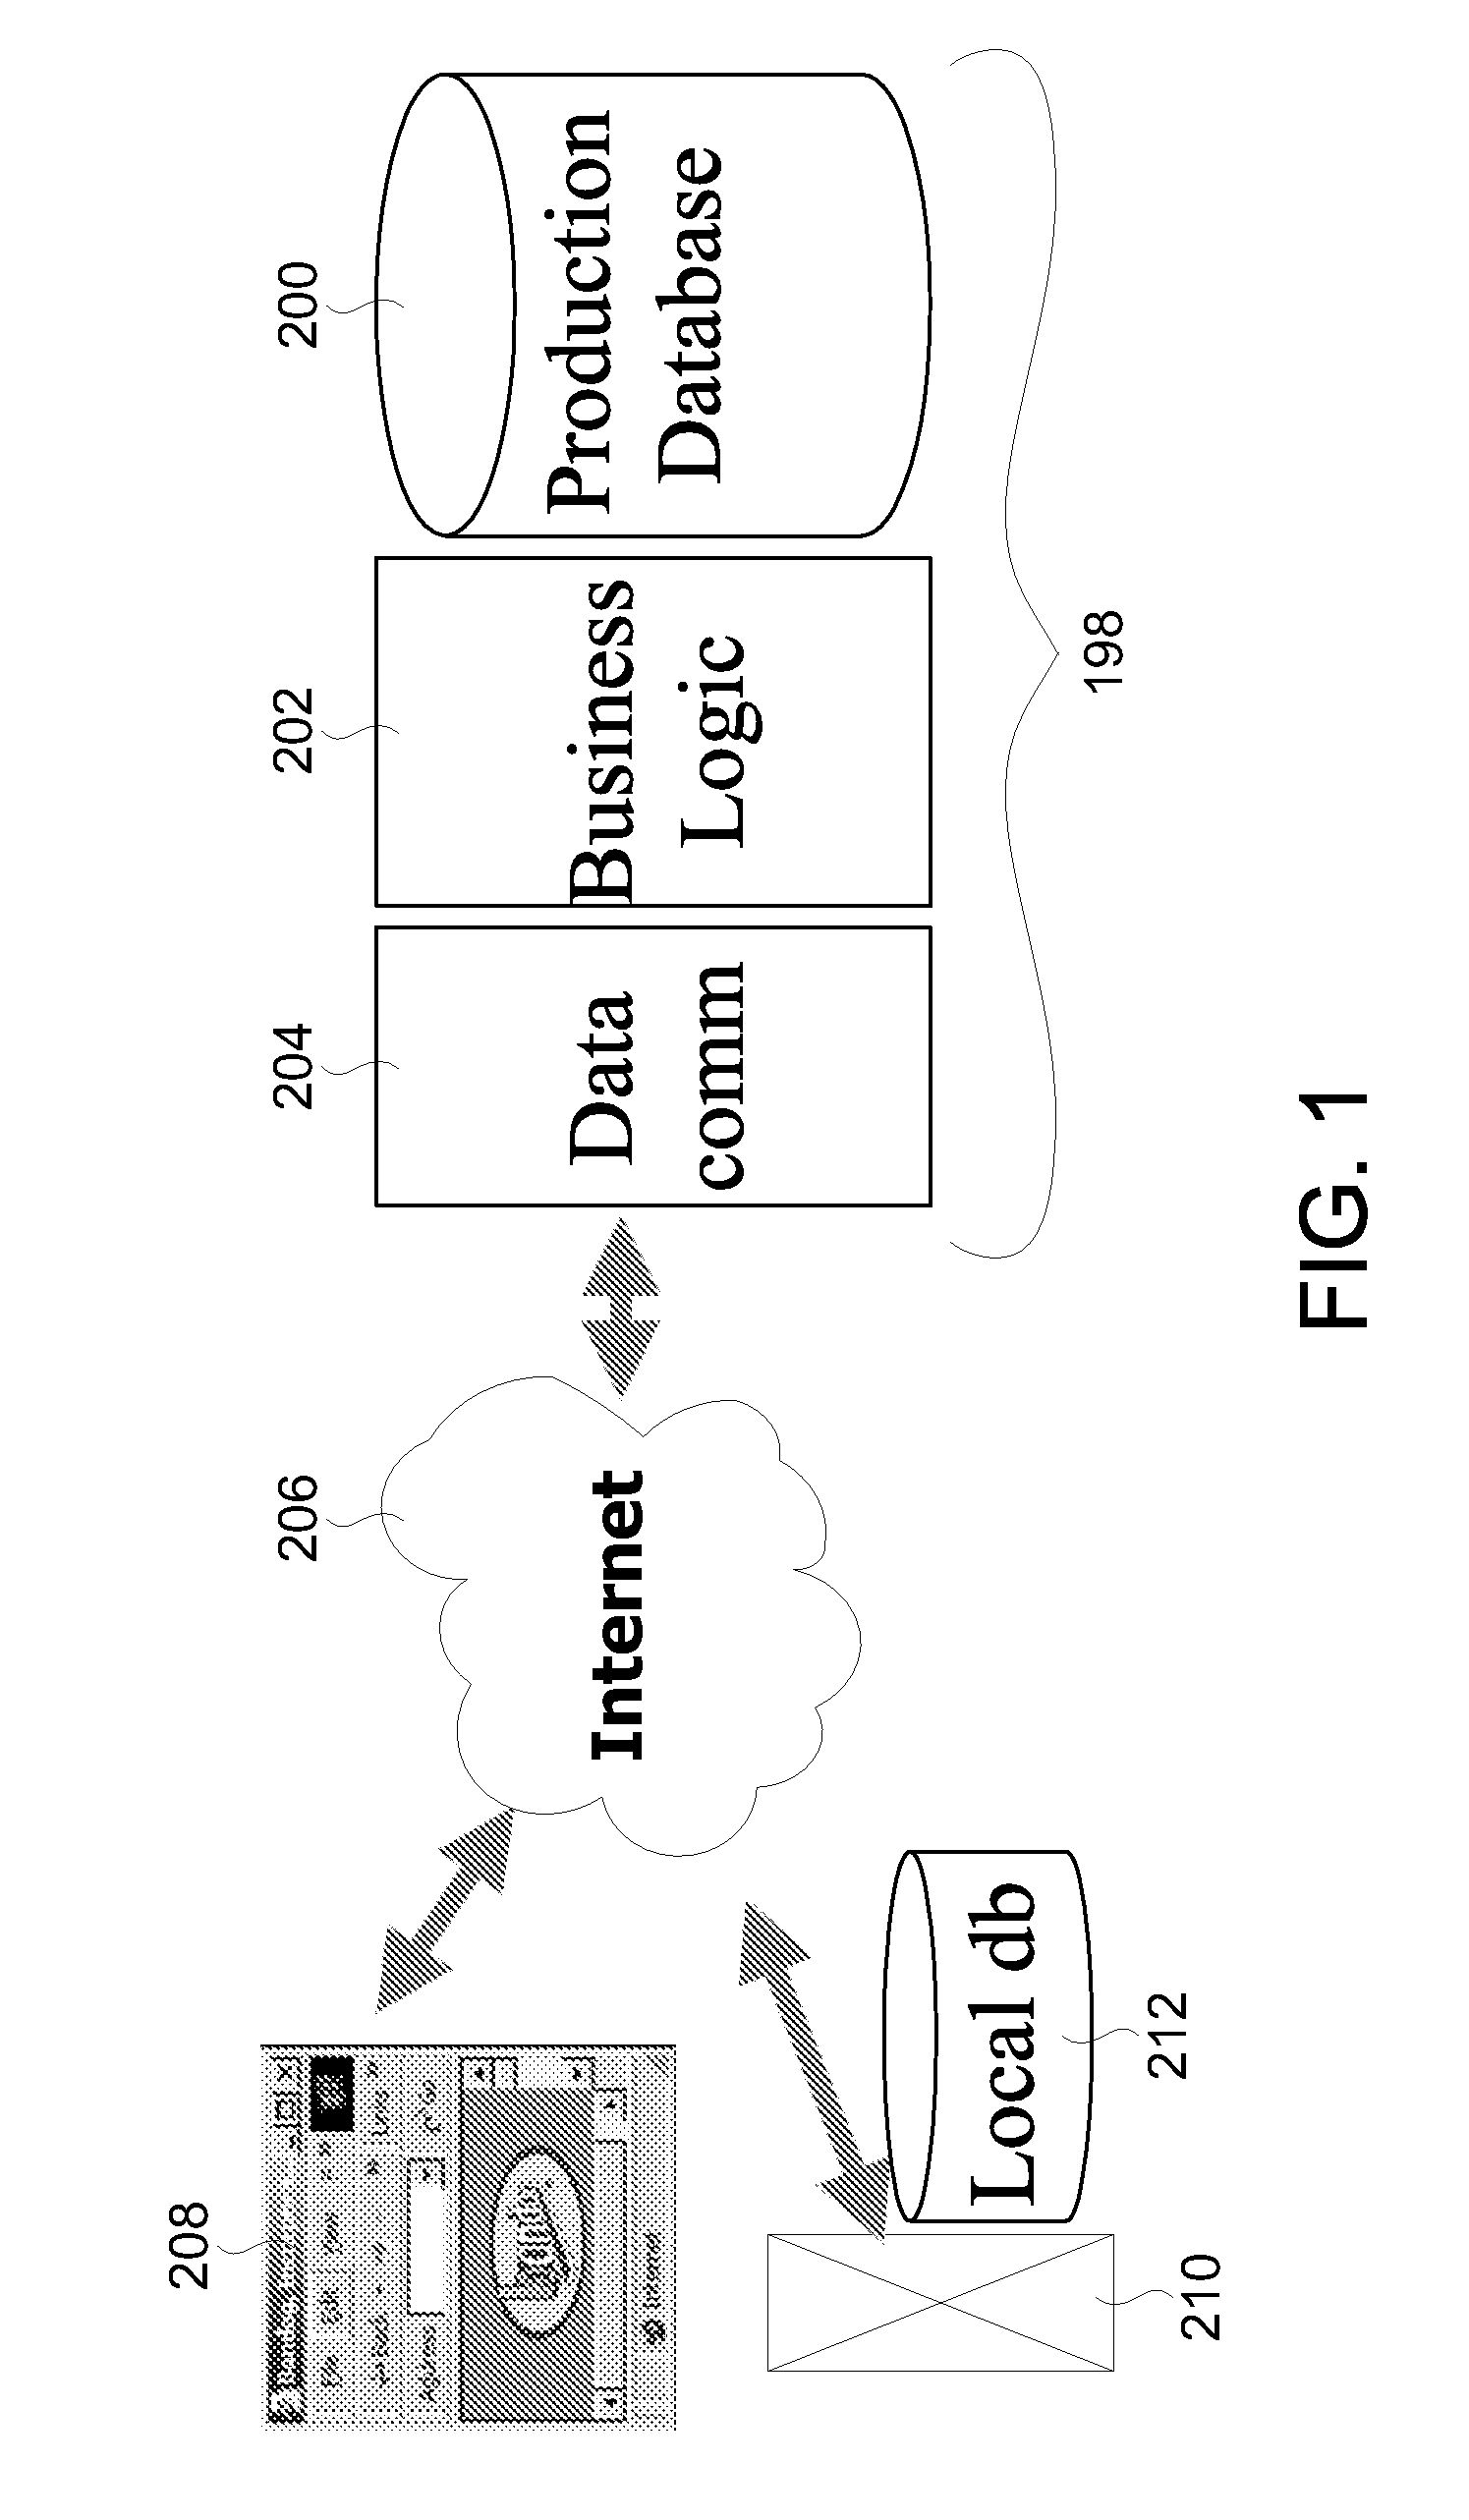 System and method for data collection, reporting, and analysis of fleet vehicle information